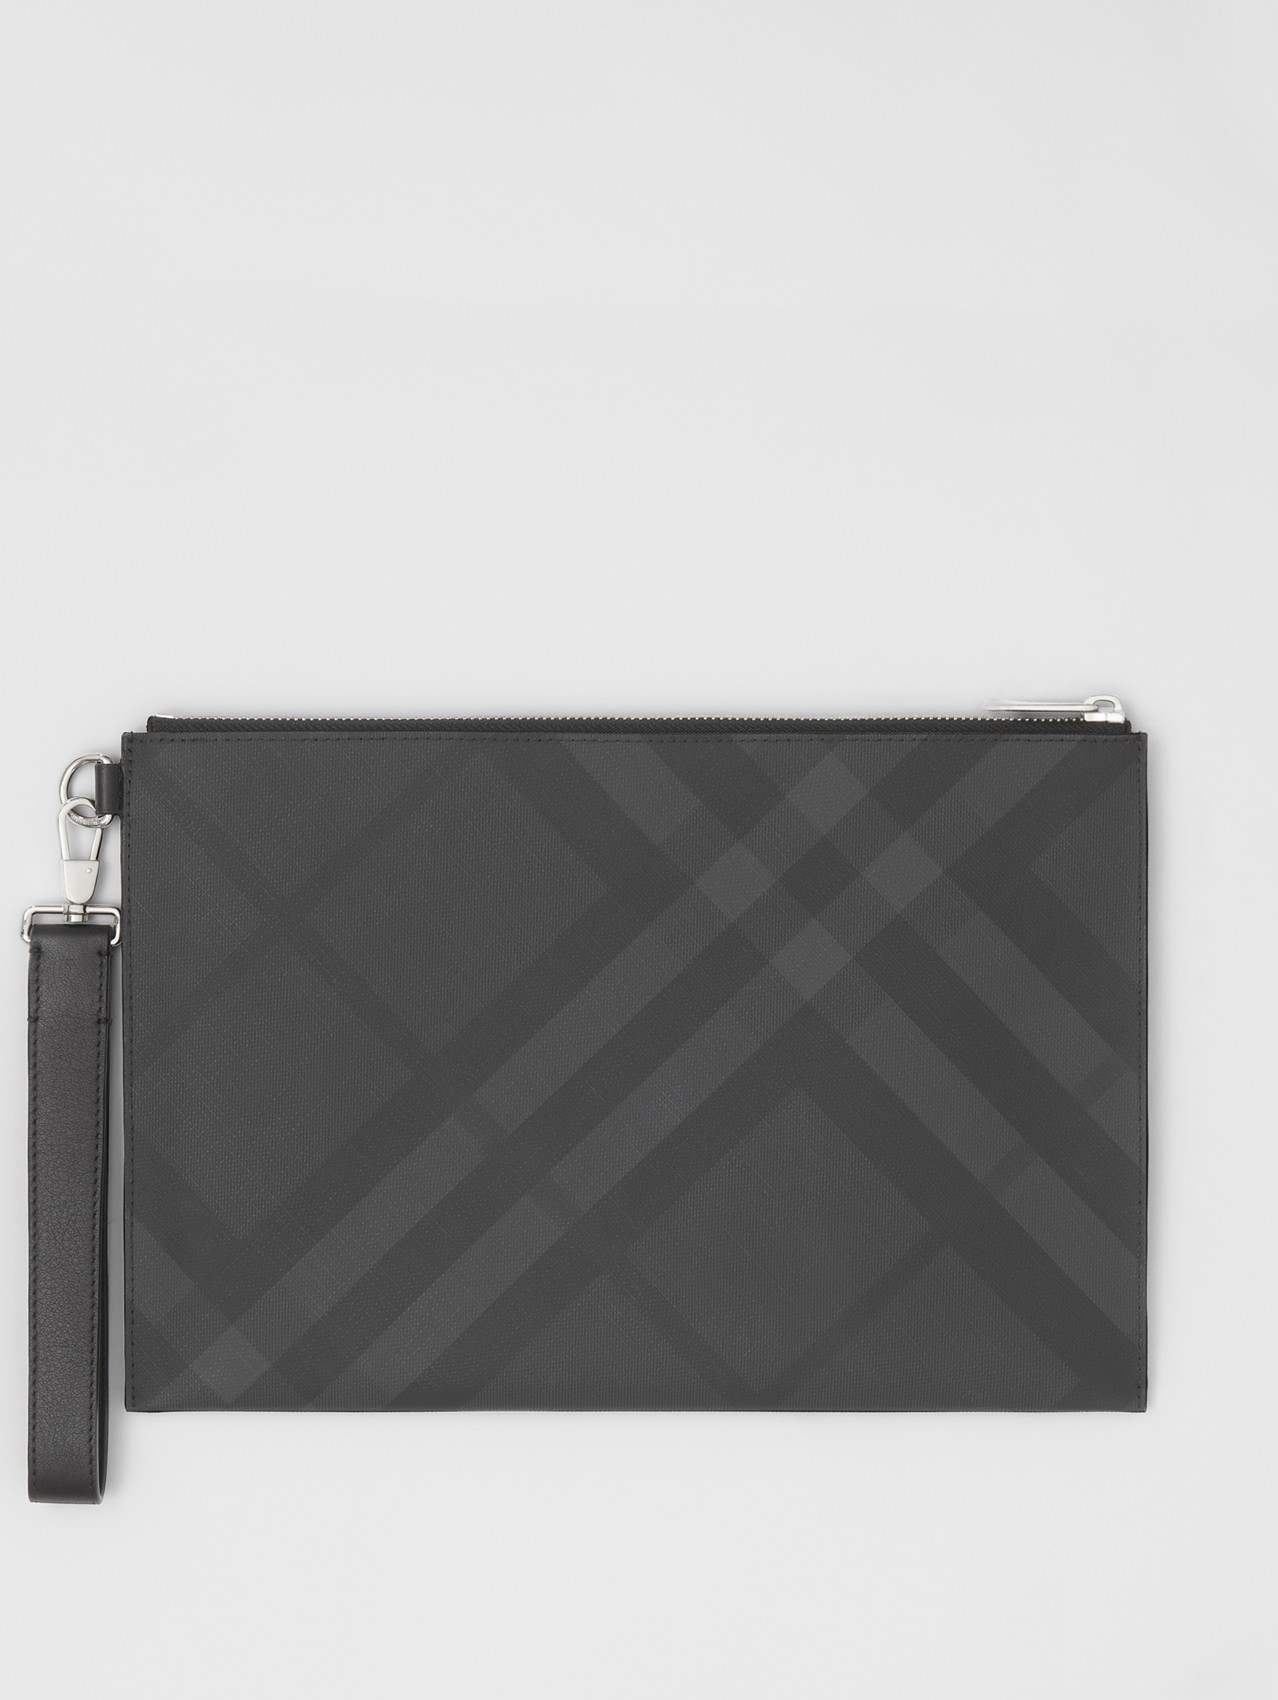 London Check and Leather Zip Pouch in Dark Charcoal